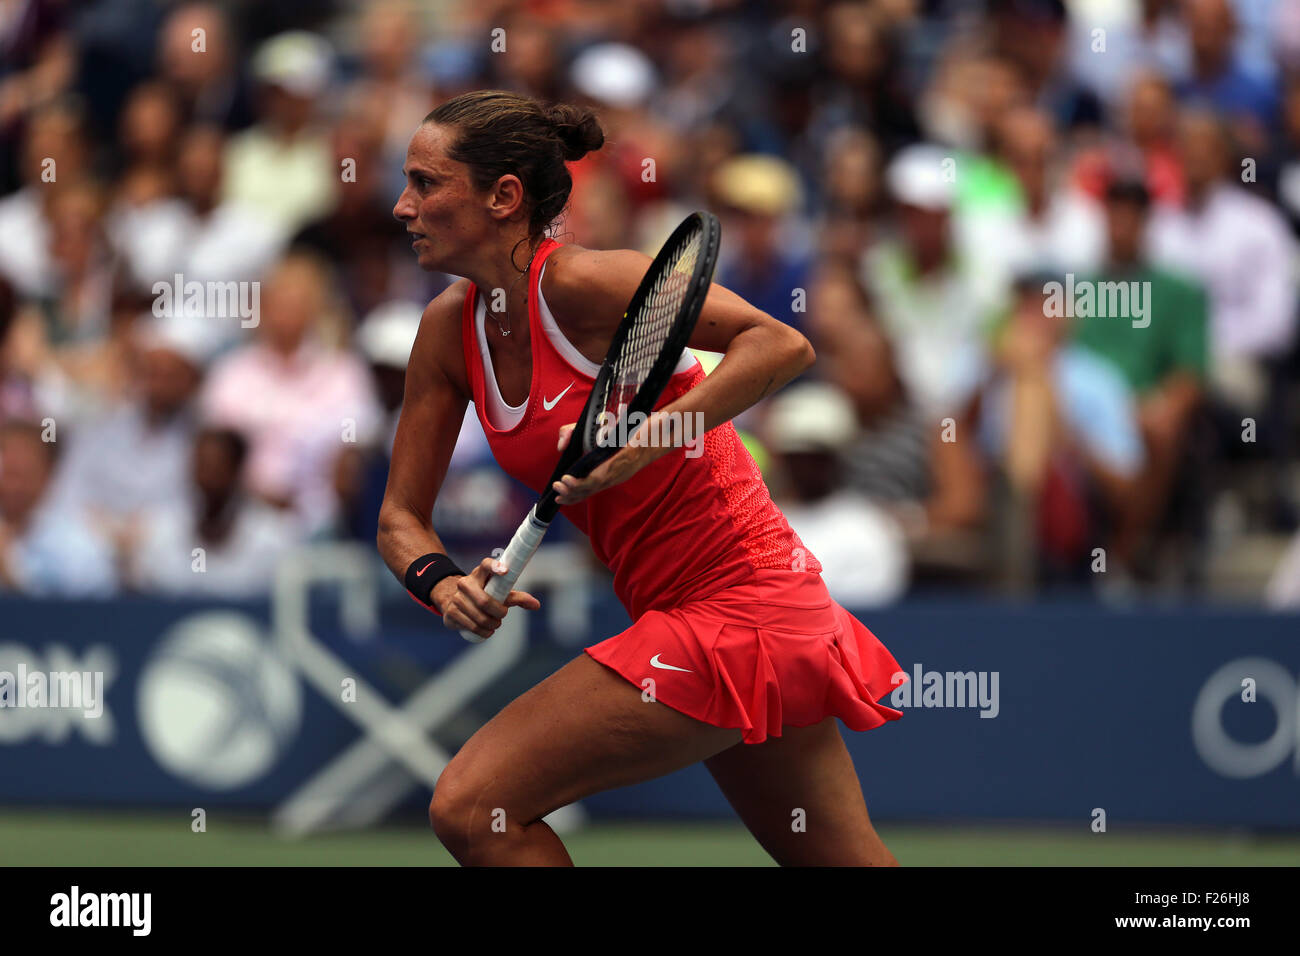 New York, USA. 12th Sep, 2015. Roberta Vinci of Italy moves towards the net against countrywoman Flavia Penetta during the women's final of the U.S. Open at Flushing Meadows, New York on the afternoon of September 12th, 2015.  Pennetta won the match 7-6 (7-4), 6-2 Credit:  Adam Stoltman/Alamy Live News Stock Photo